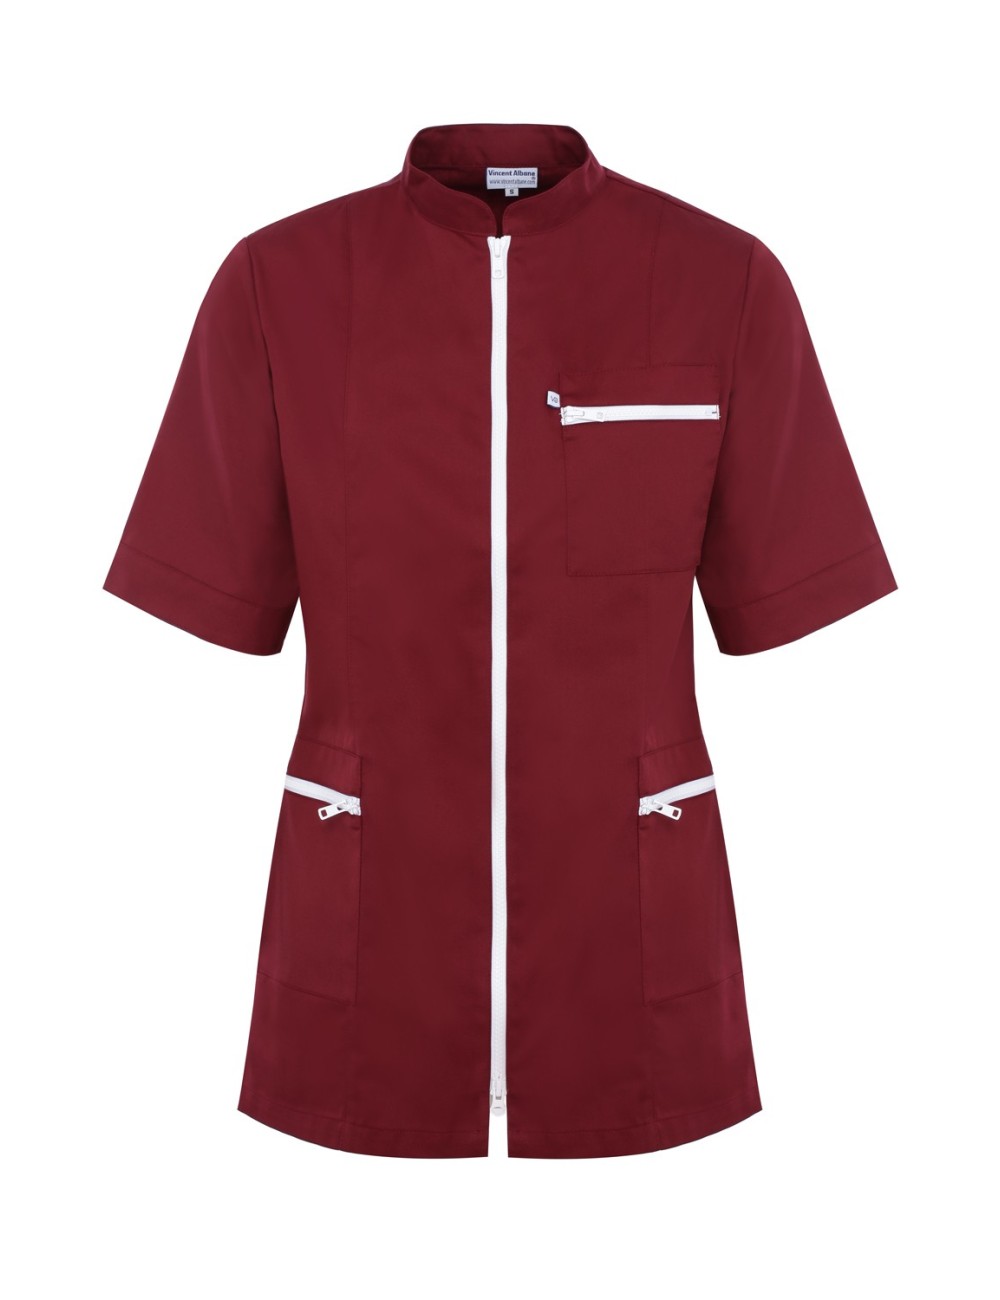 medical fitted tunic for women with zip